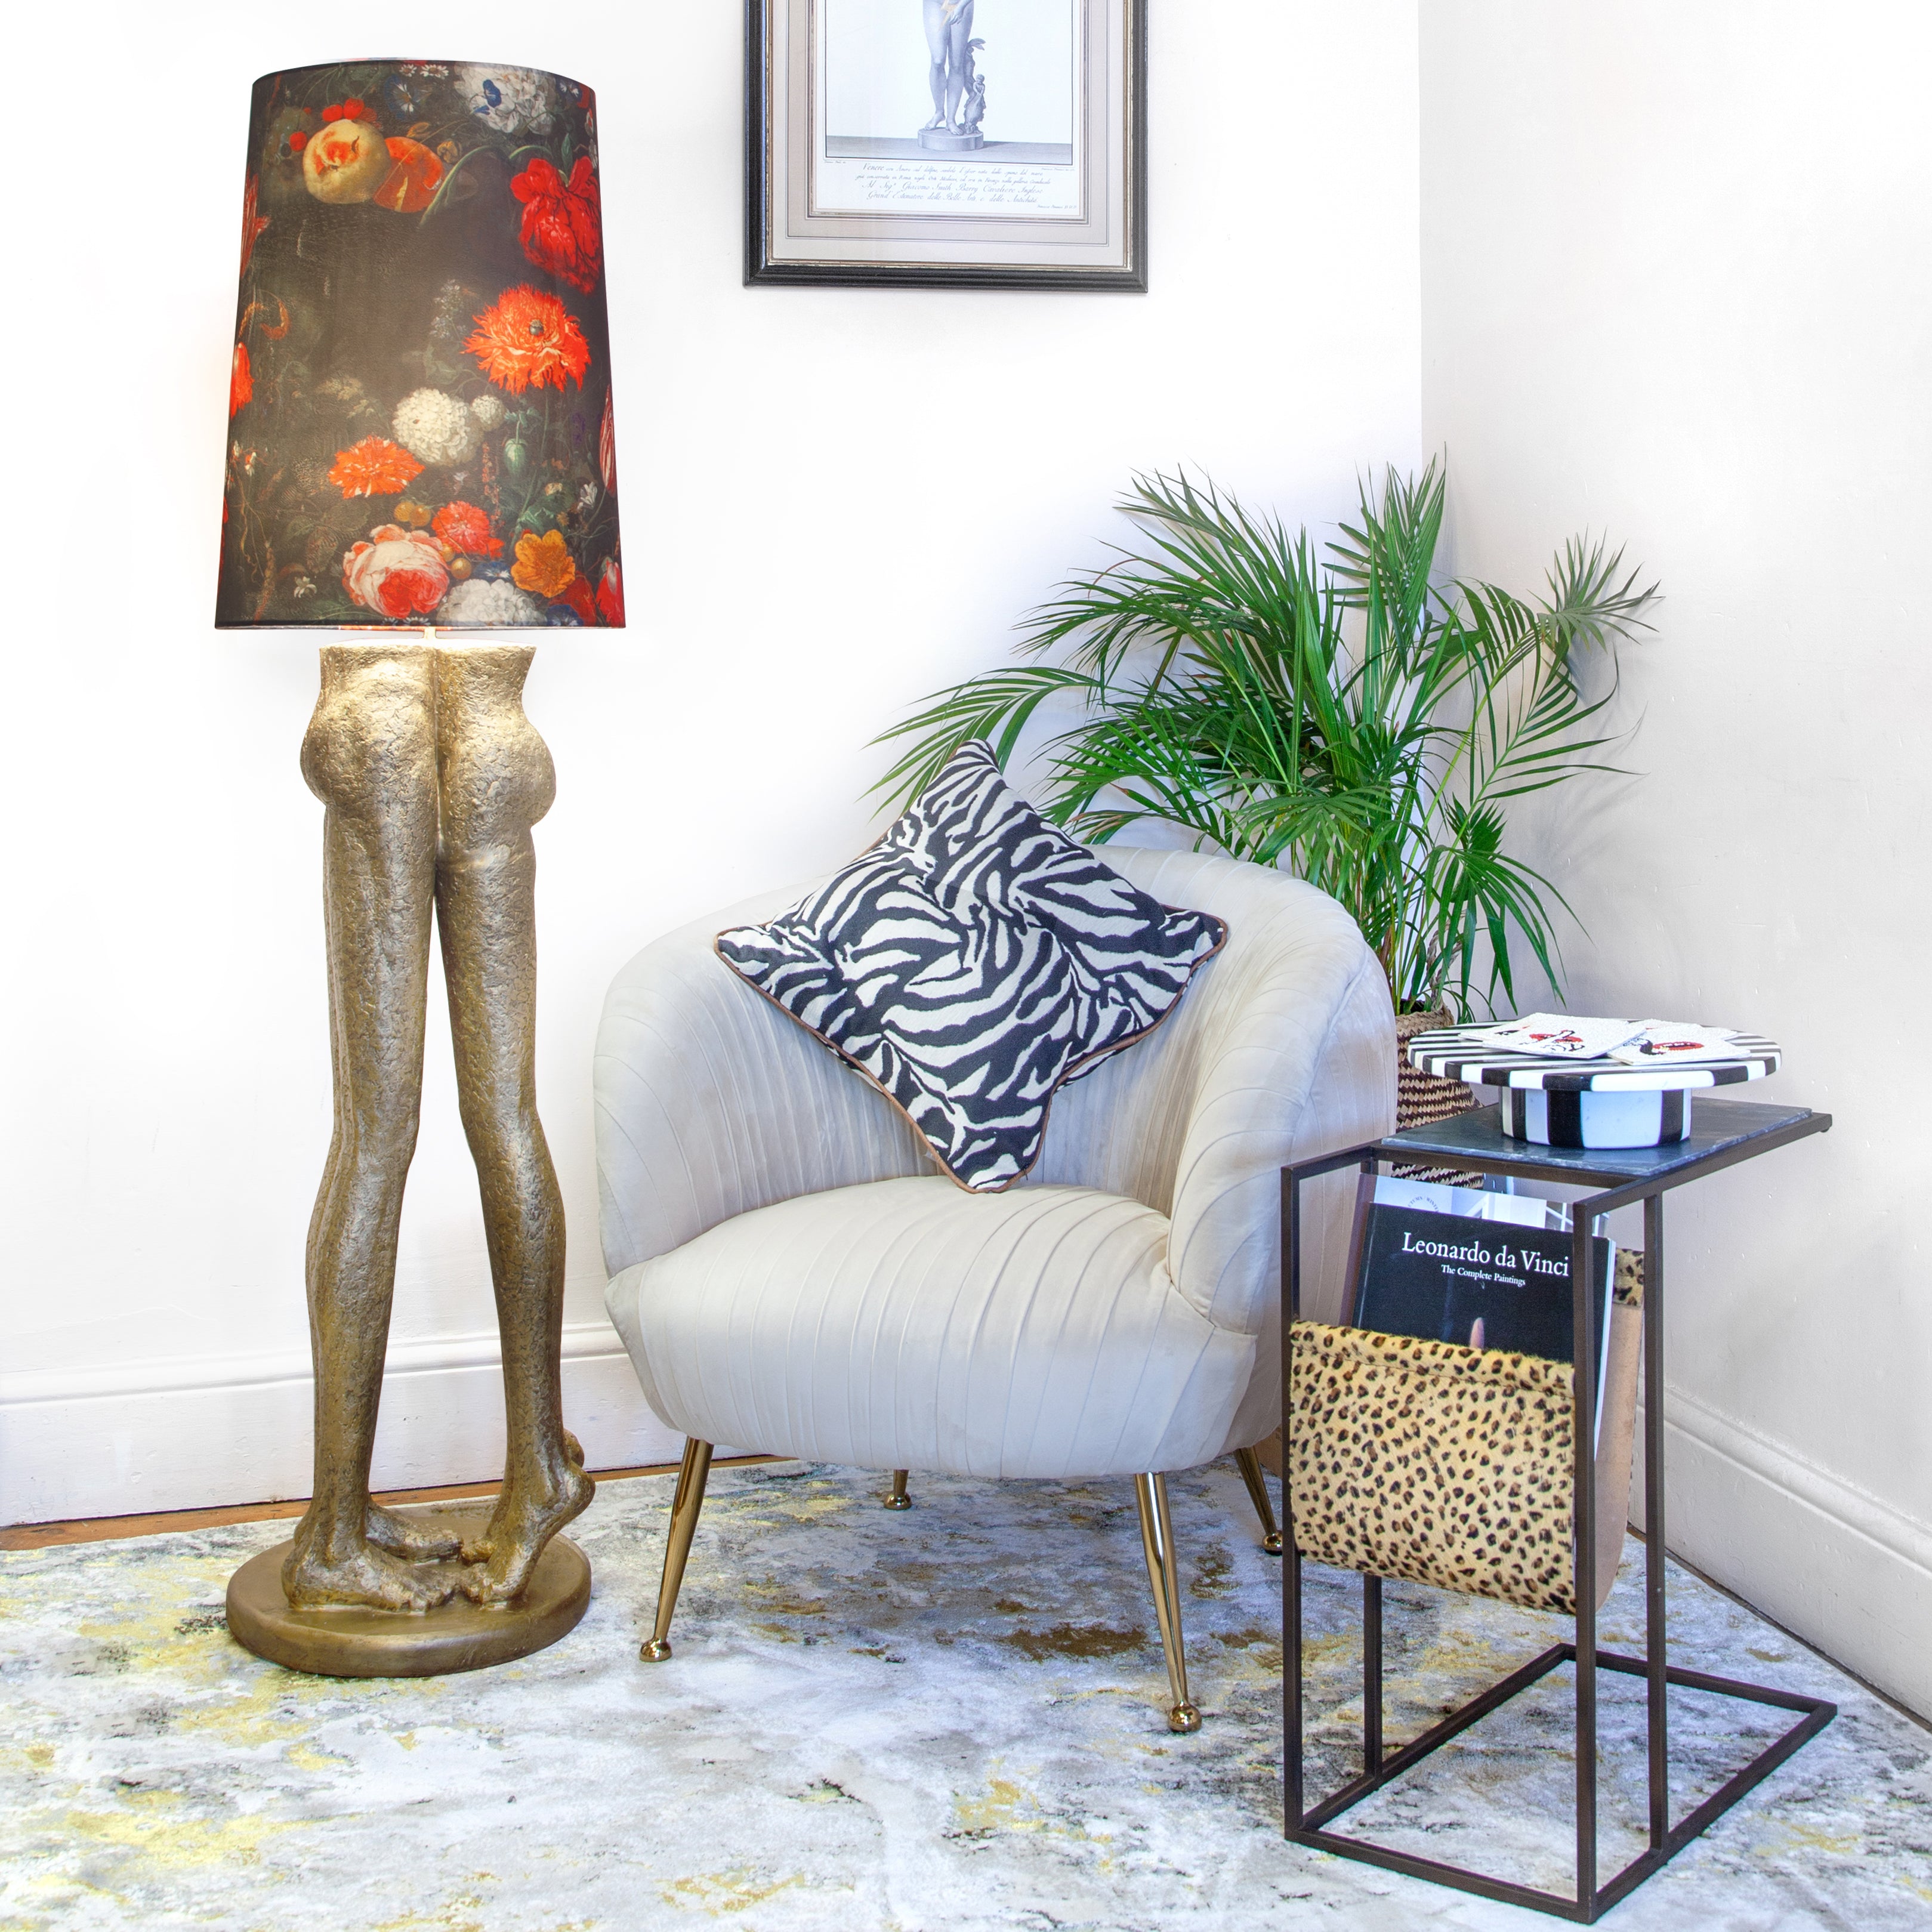 Black Marble Side Table with Leopard Print Magazine Holder